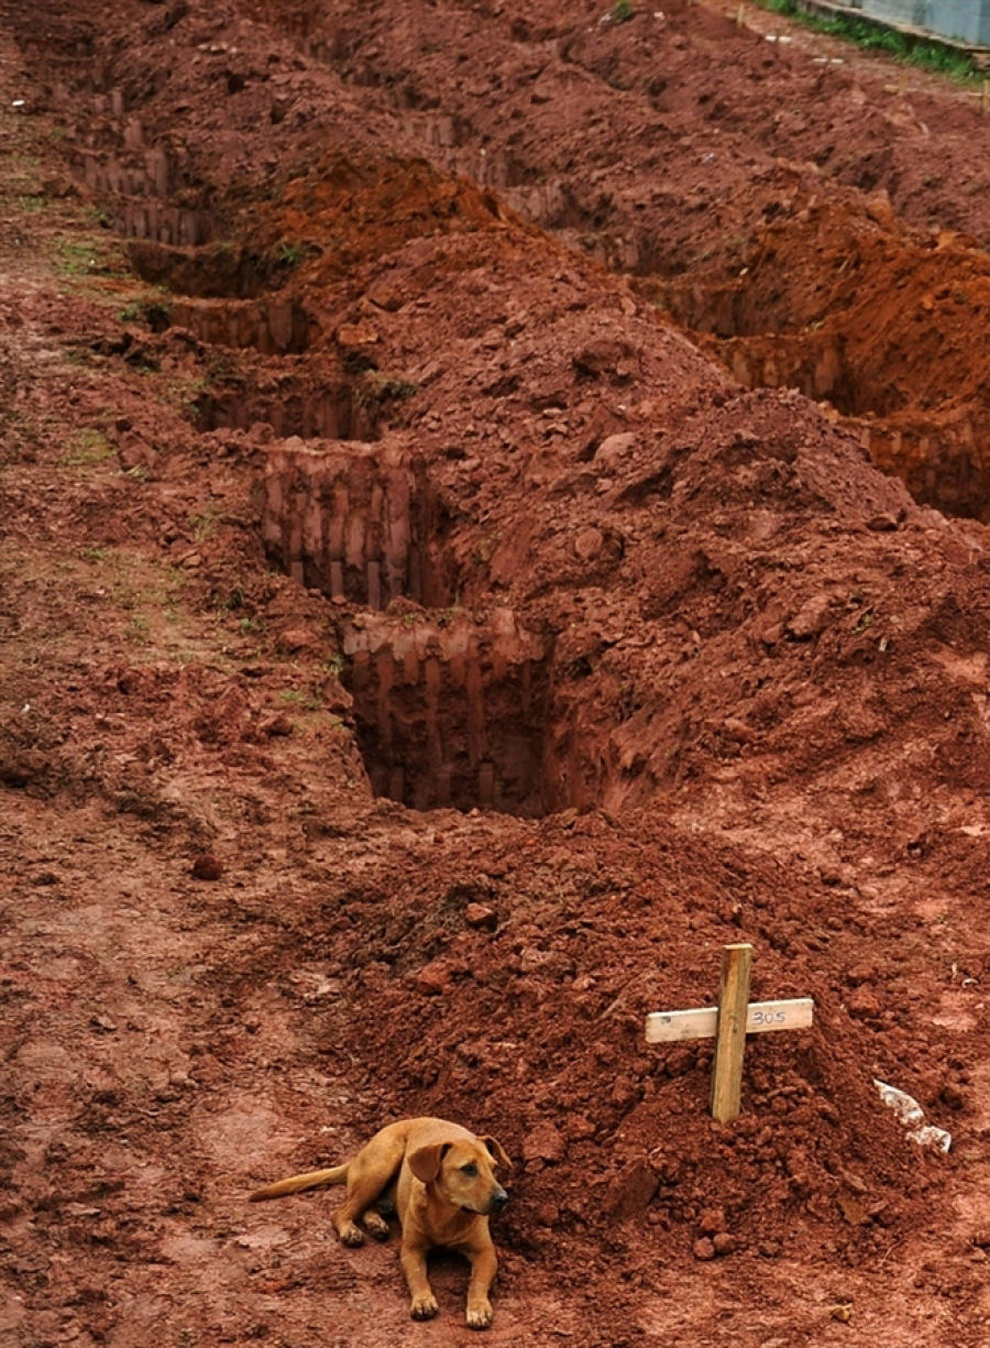 A dog named “Leao” sits for a second consecutive day at the grave of her owner, who died in the disastrous landslides near Rio de Janiero on January 15, 2011.